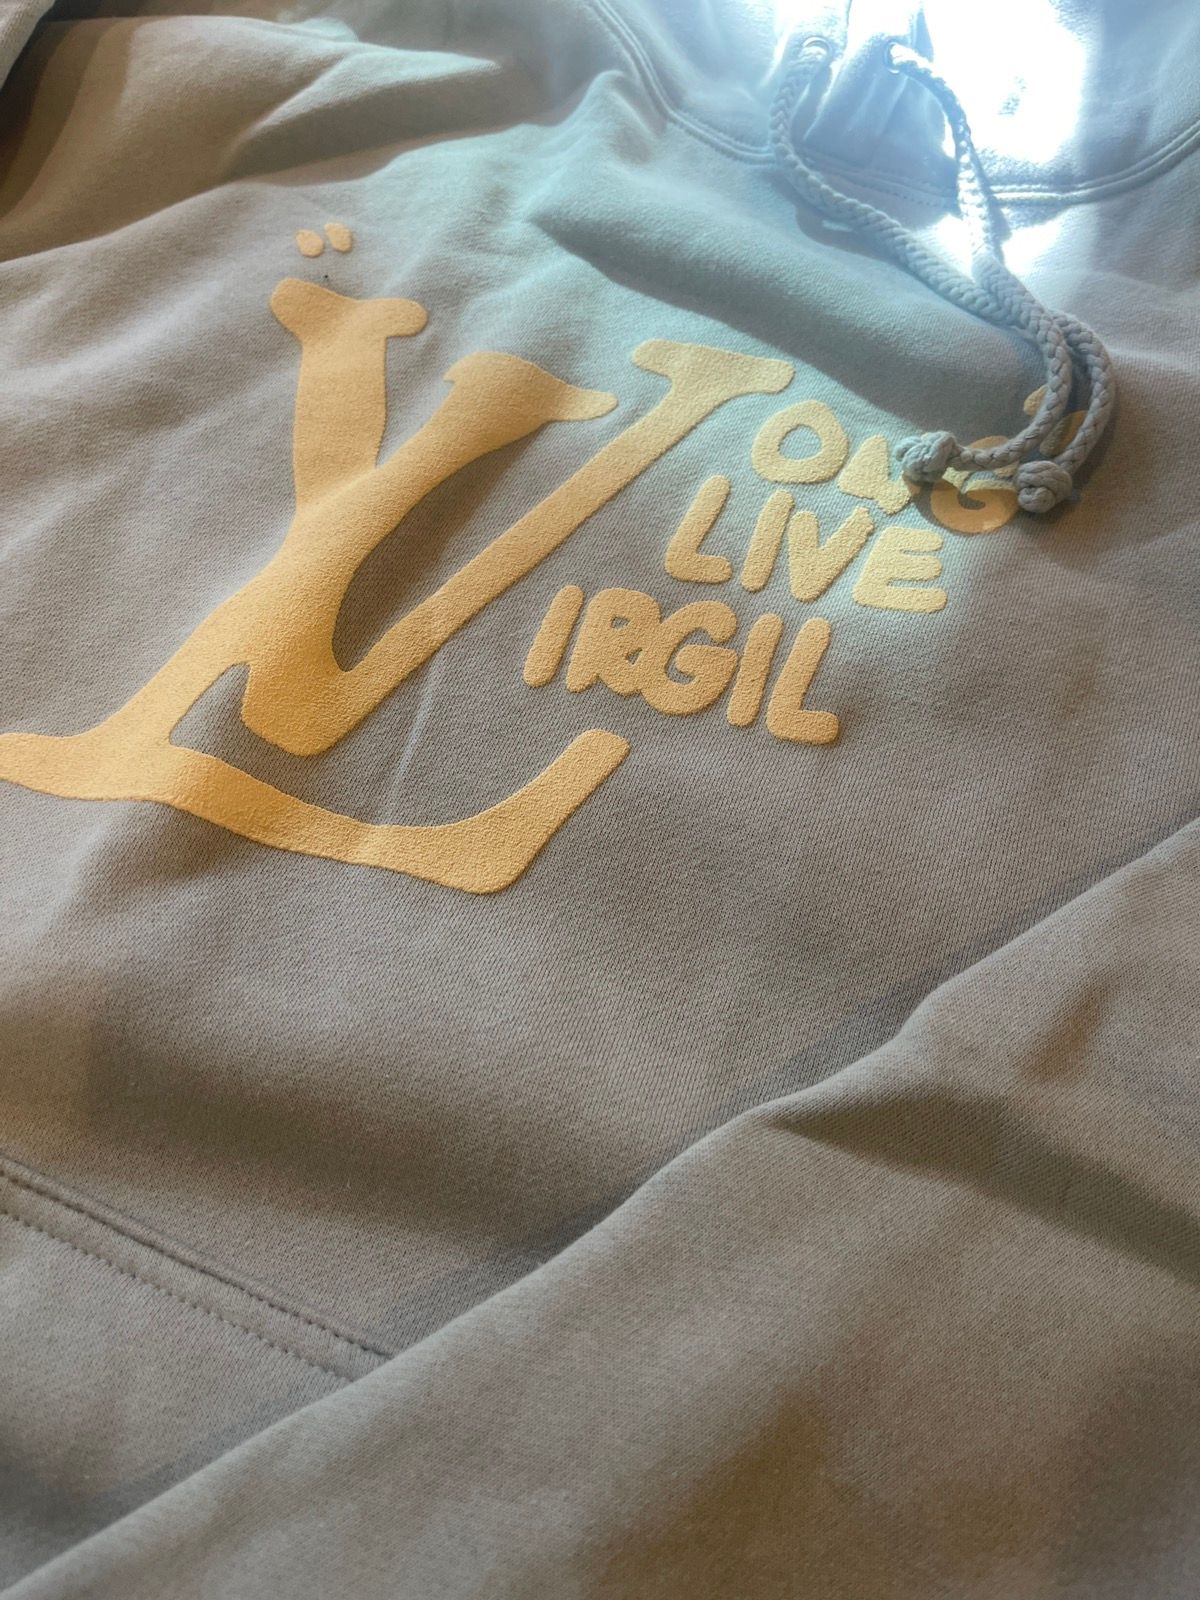 Long Live Virgil Limited Pink Hoodie Size Large Brand New Never